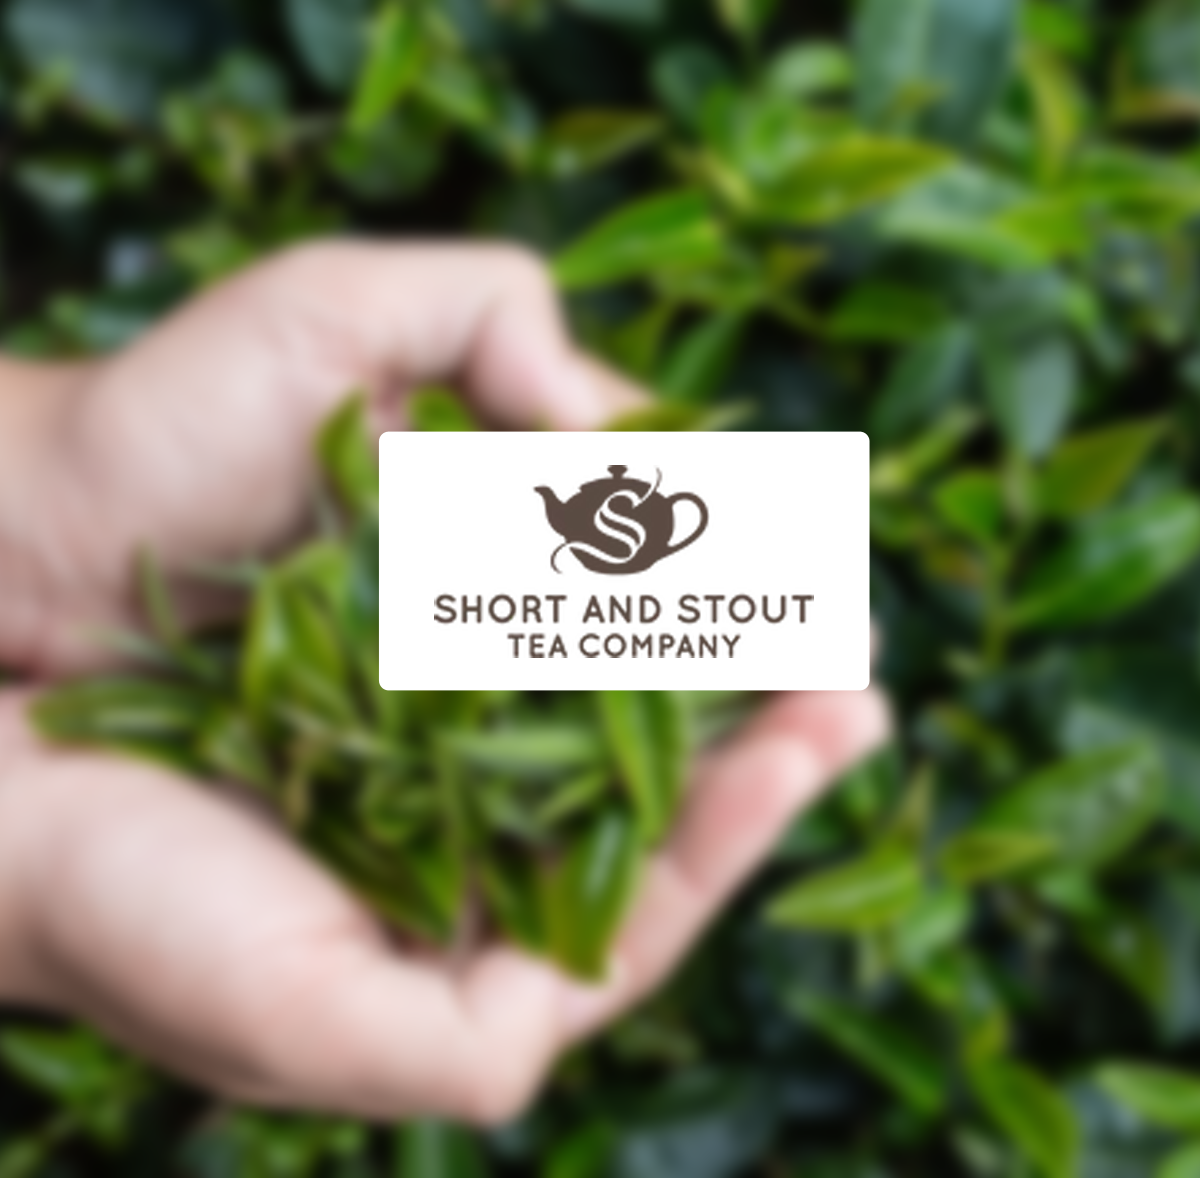 What’s Brewing at Short and Stout Tea in April